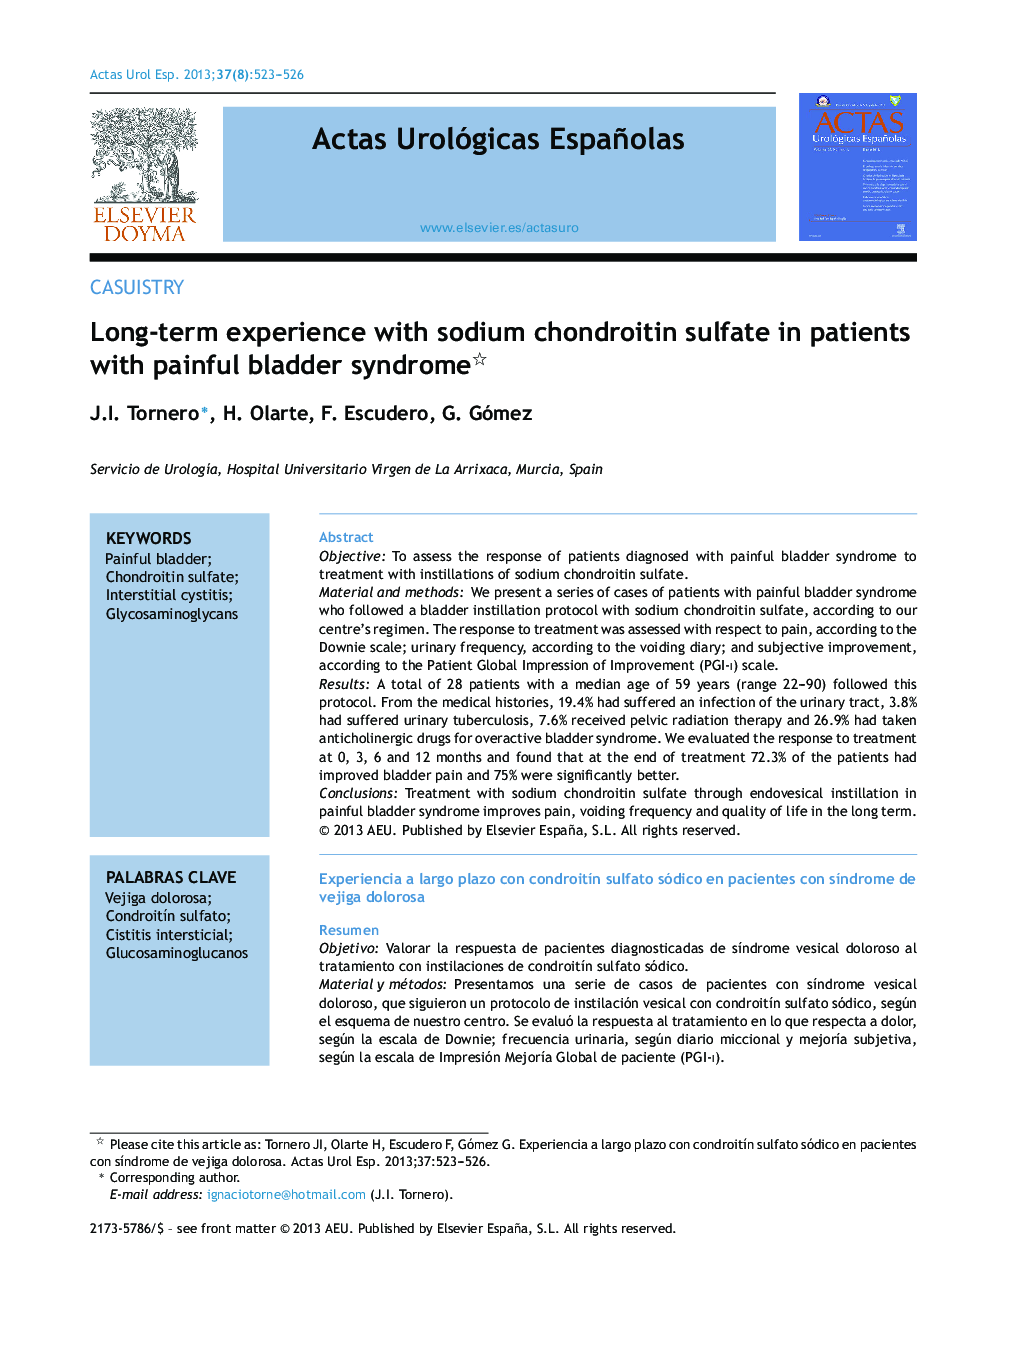 Long-term experience with sodium chondroitin sulfate in patients with painful bladder syndrome 